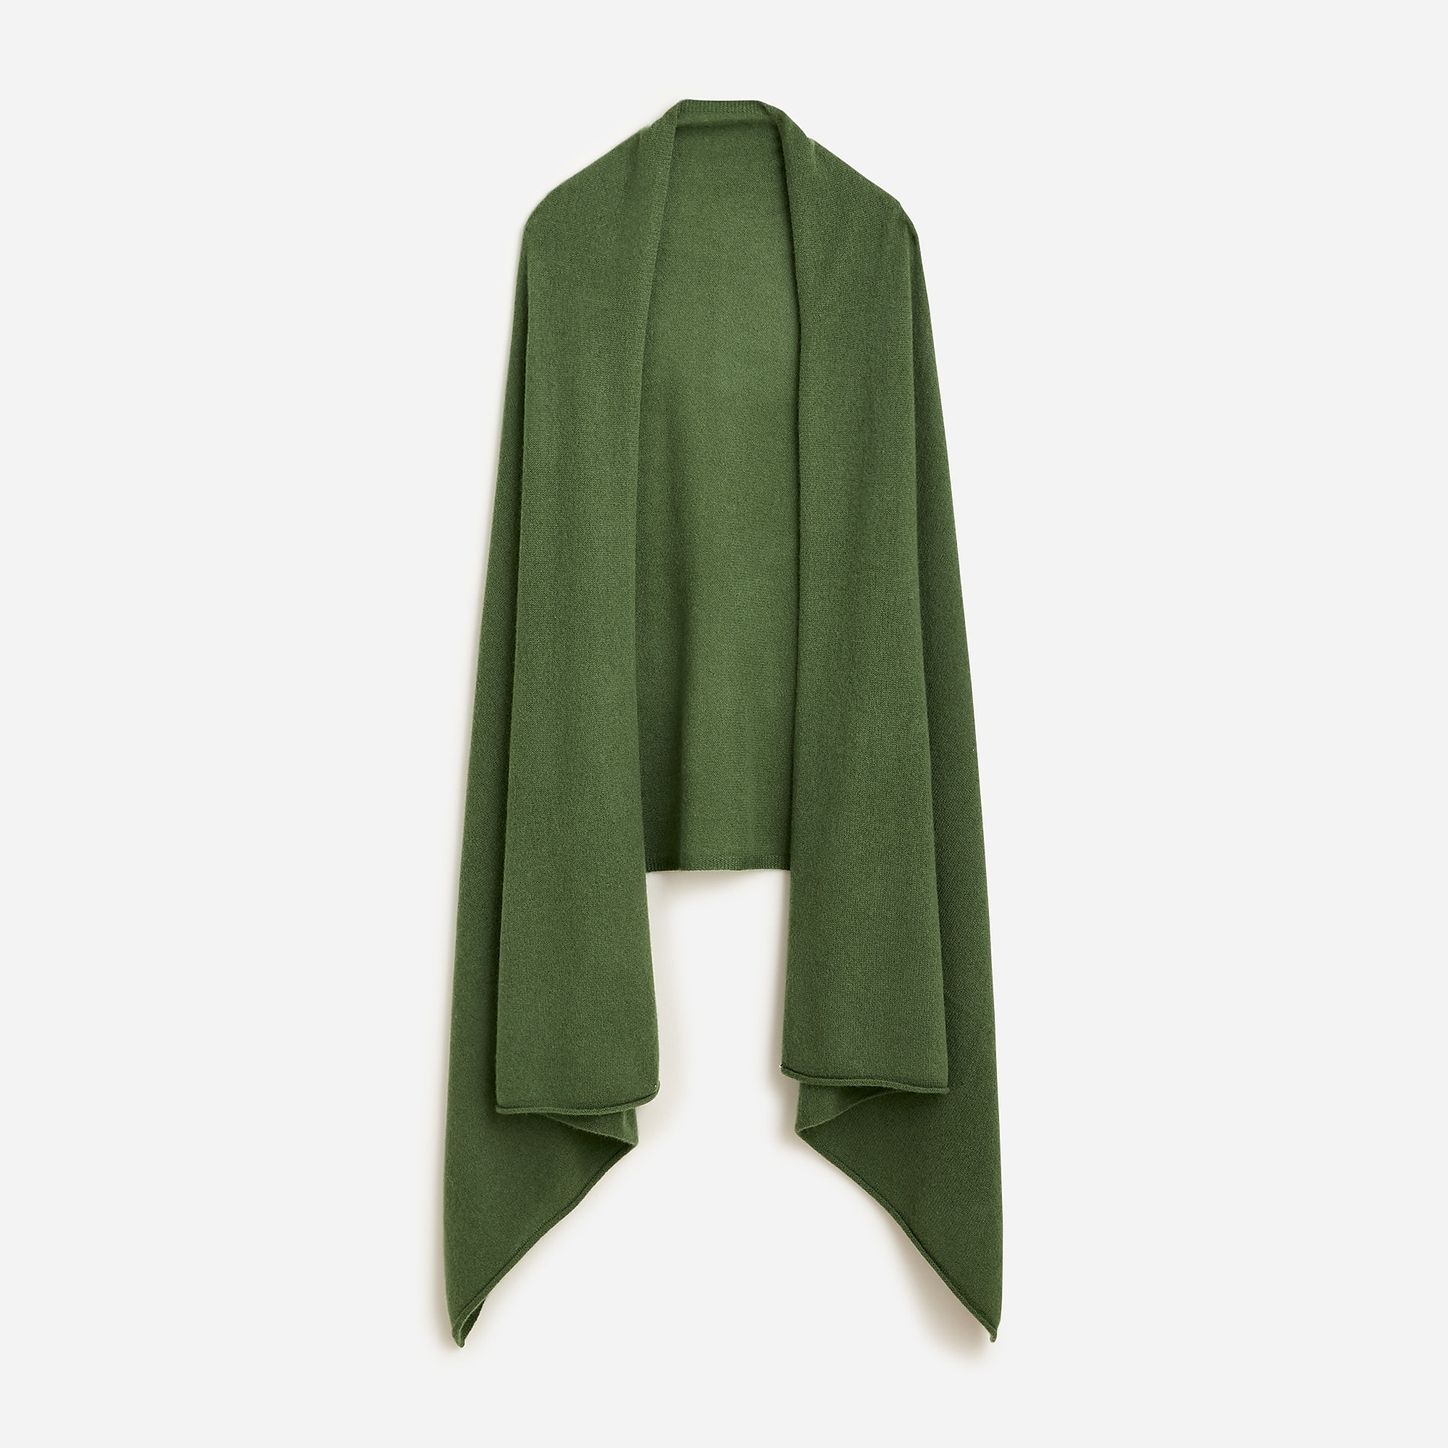 An Indestructible J.Crew Cashmere Shawl That’s Also Stylish | The ...